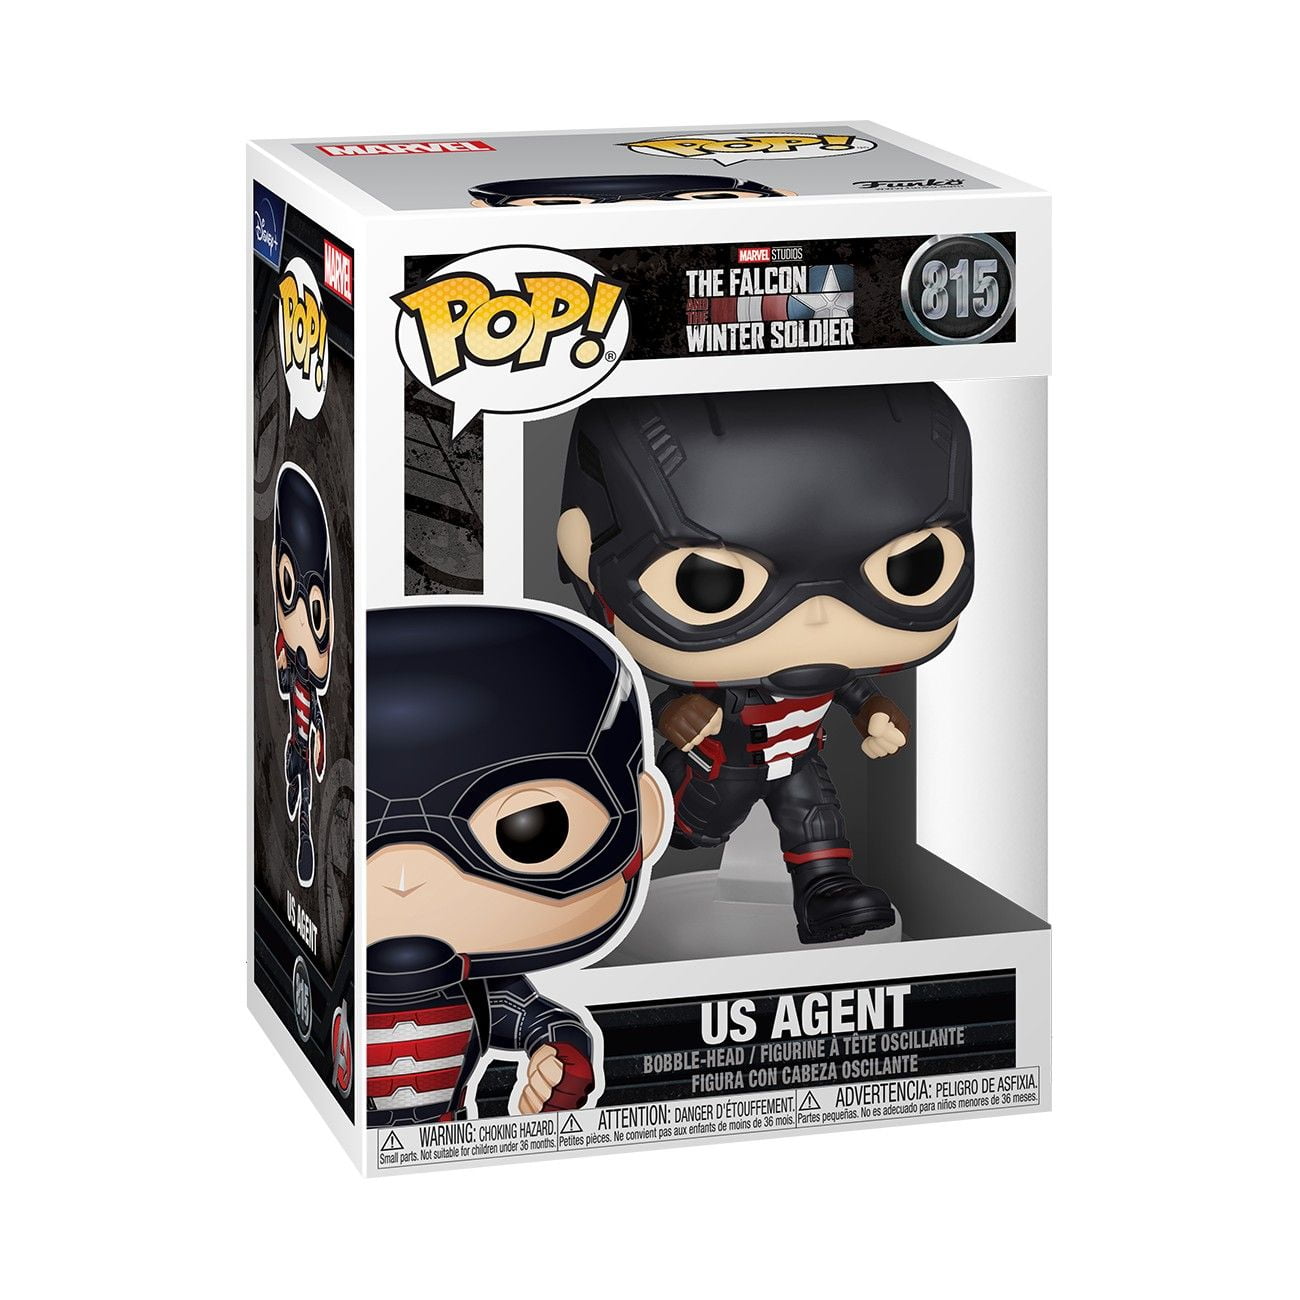 US Agent - Marvel Studios: The Falcon and The Winter Soldier - Funko POP! Vinyl (815)